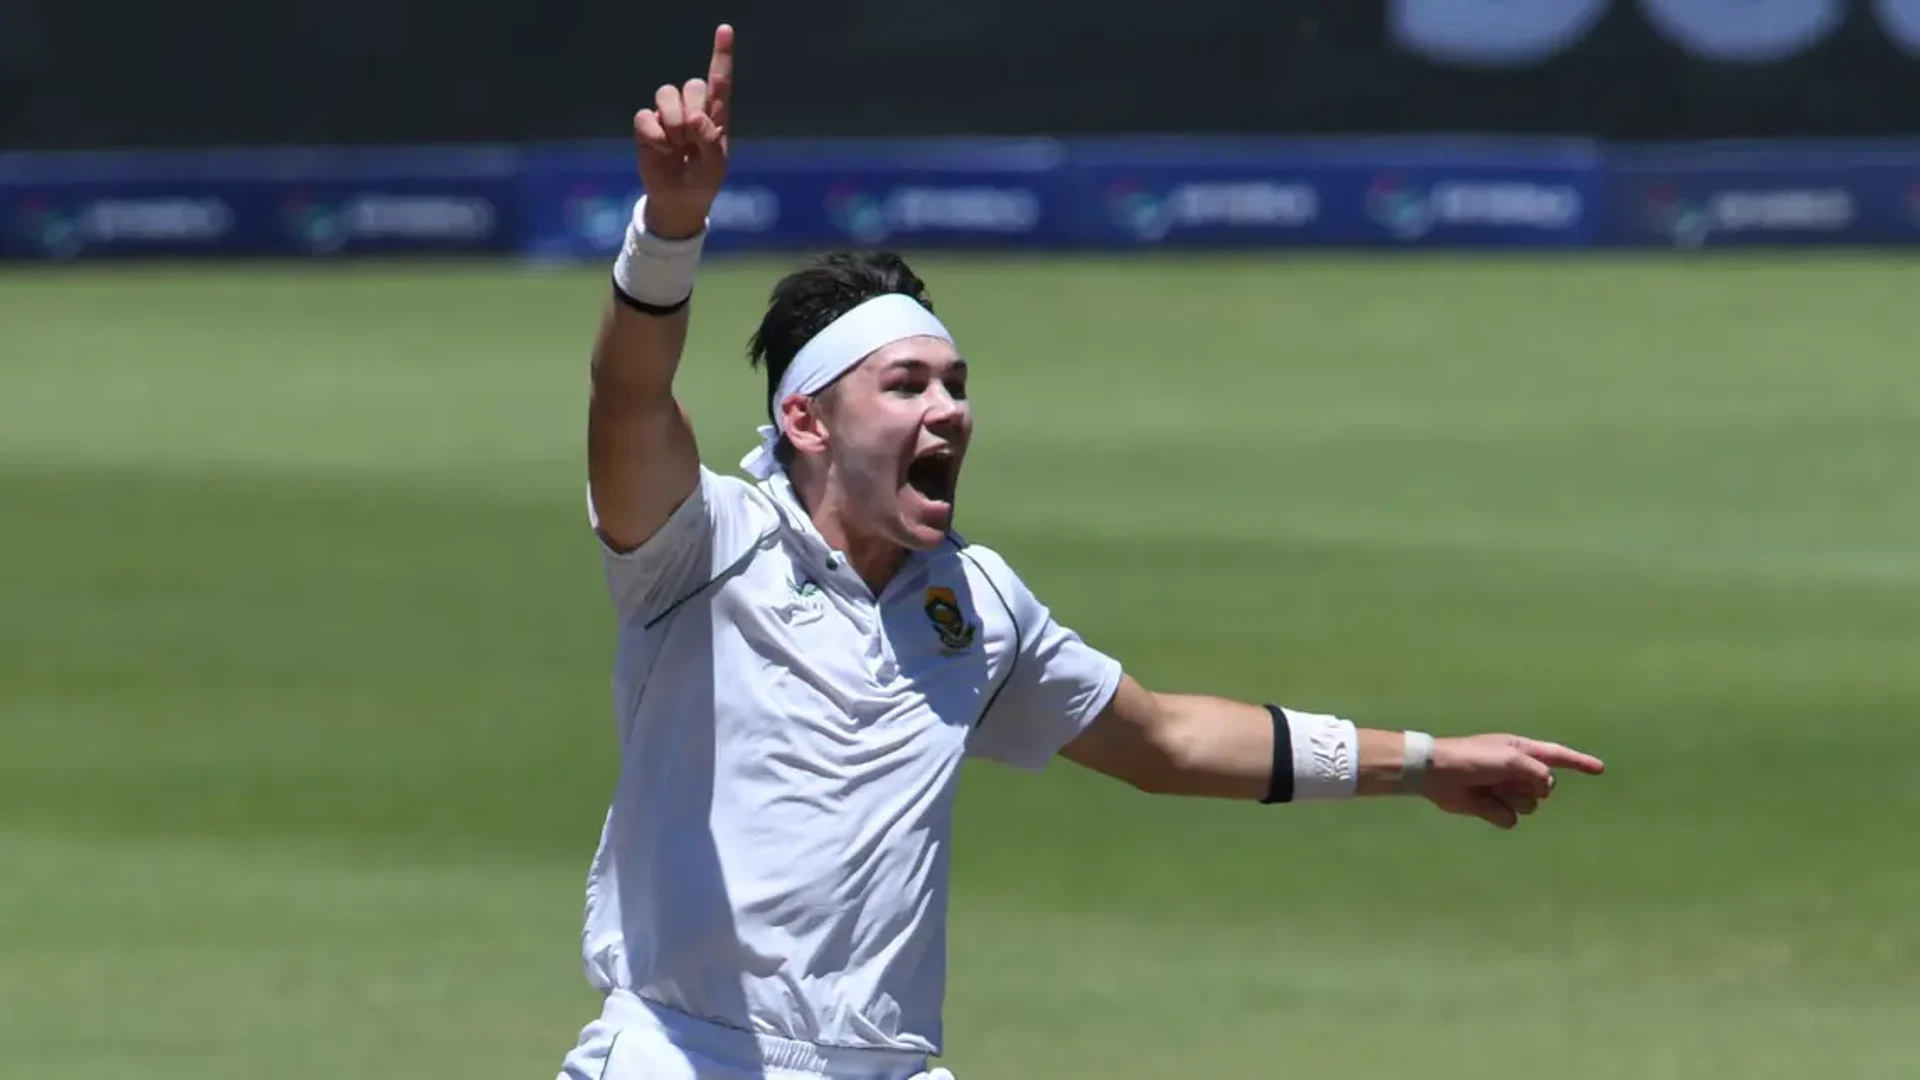 INJURED: Coetzee ruled out of Windies tour, Pretorius joins squad